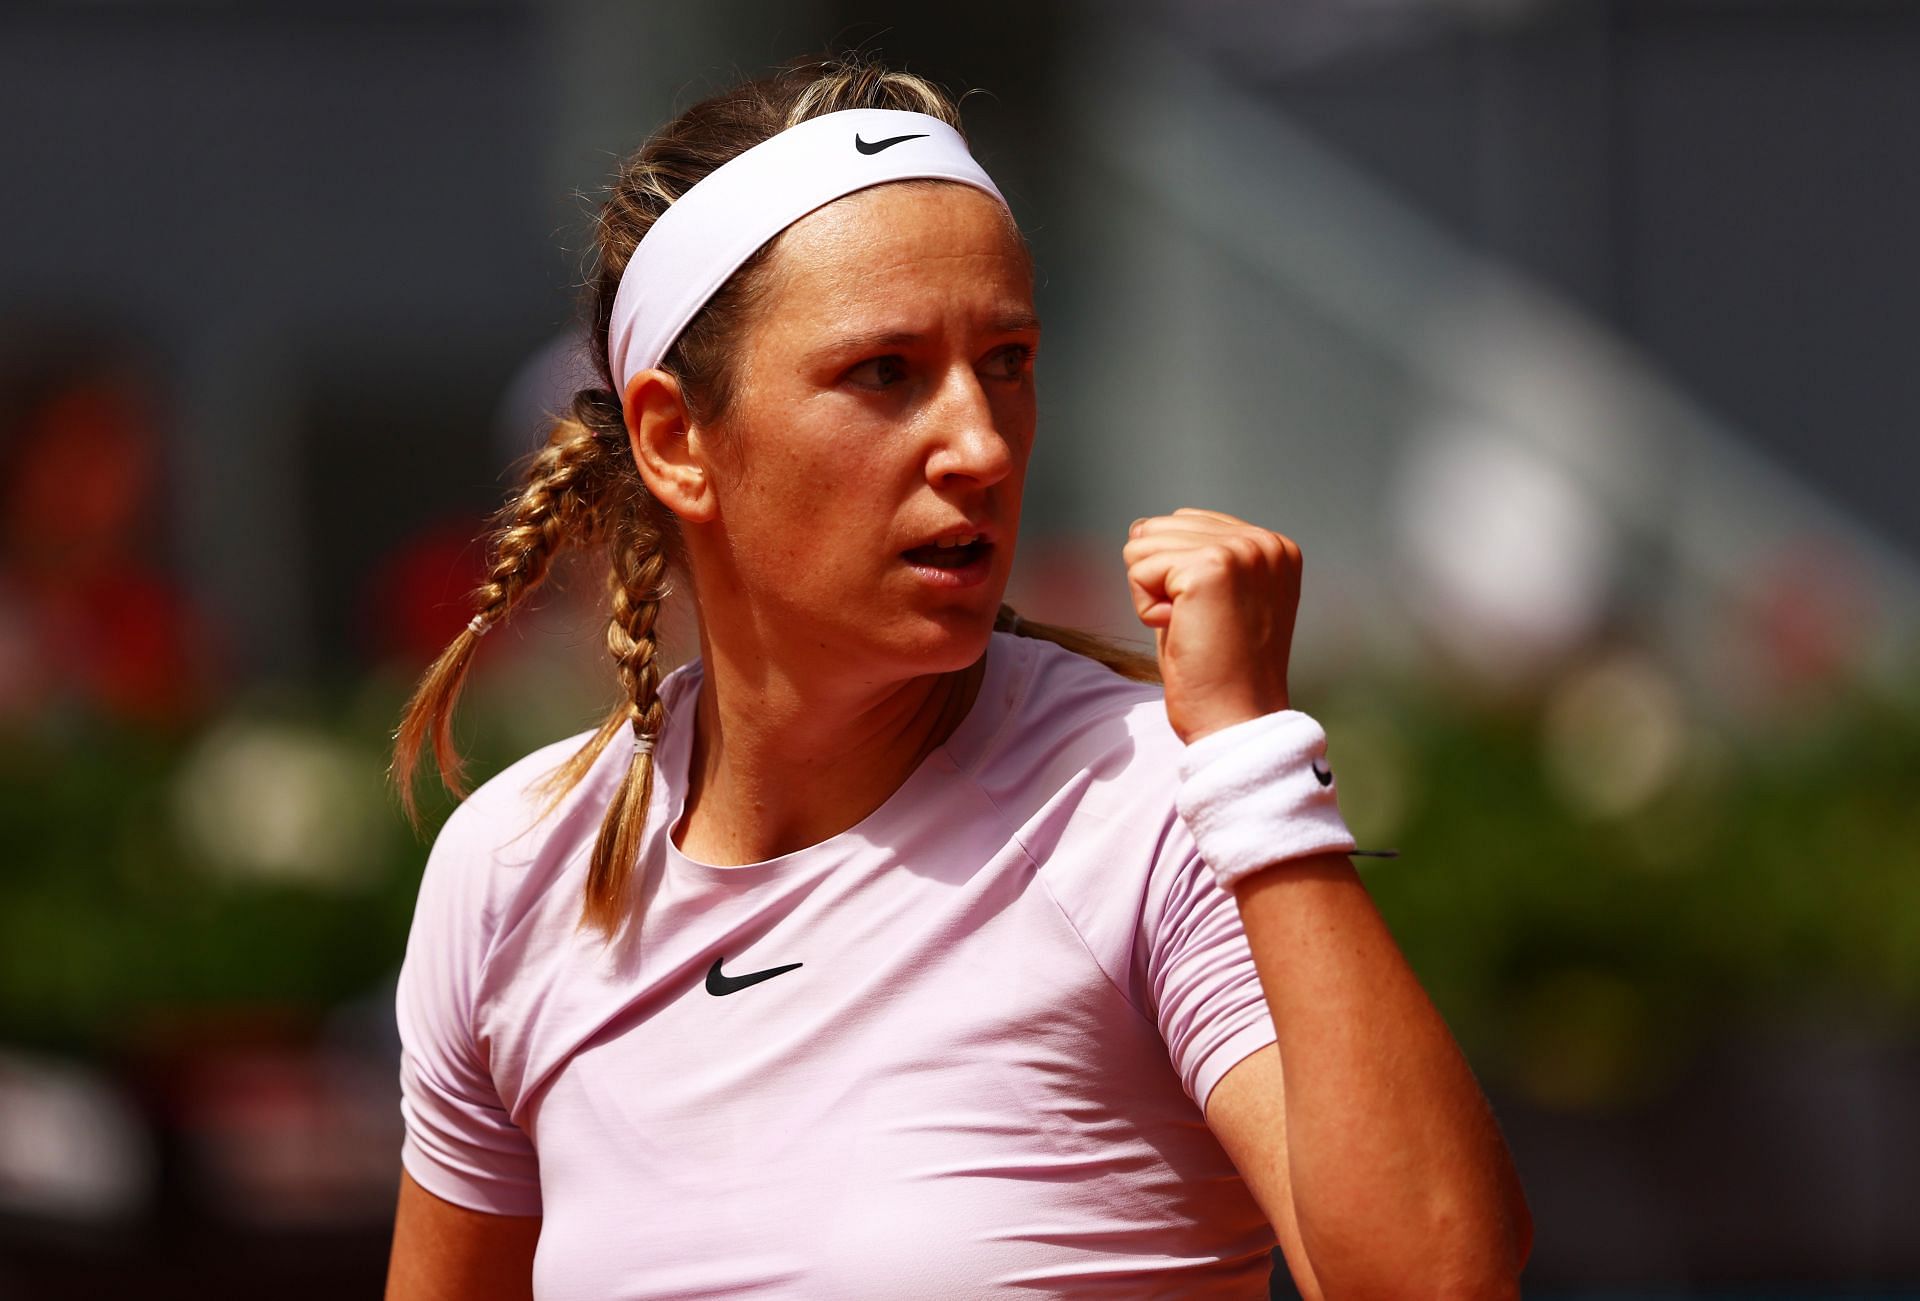 Victoria Azarenka hoped such cases of coach exploitation can be eliminated from the WTA Tour soon